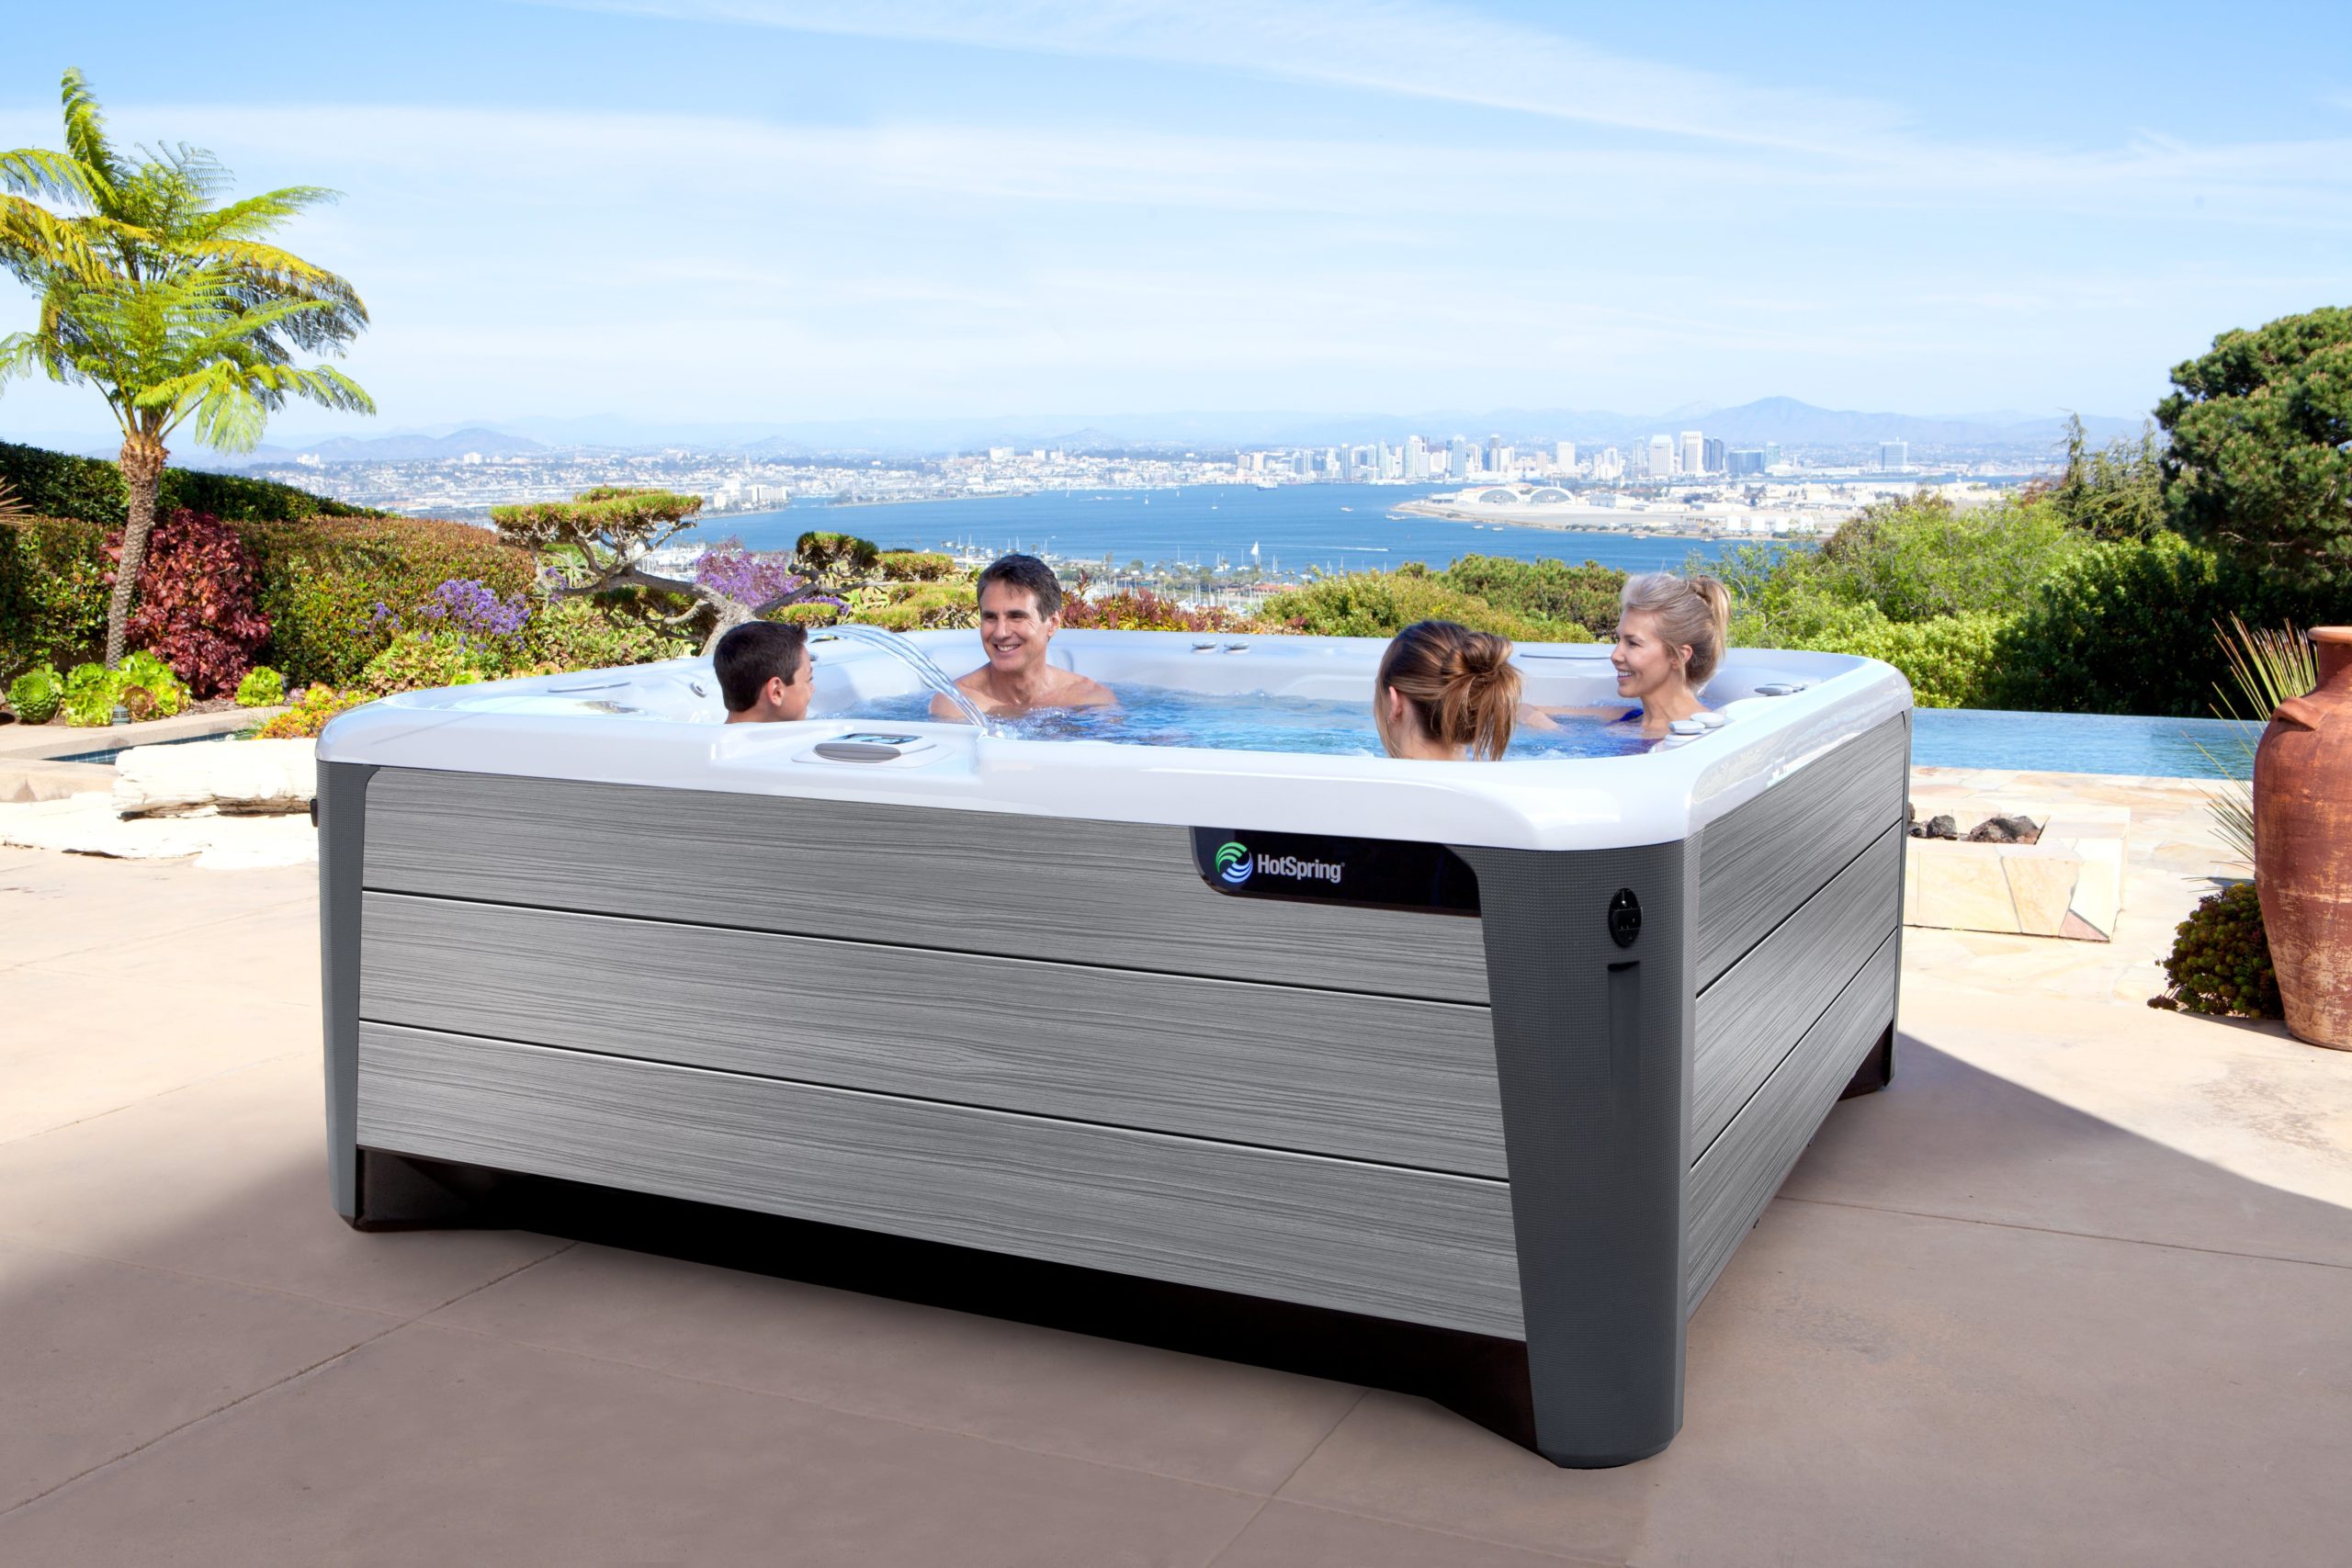 What water care options get you as close as possible to a chemical-free hot tub?